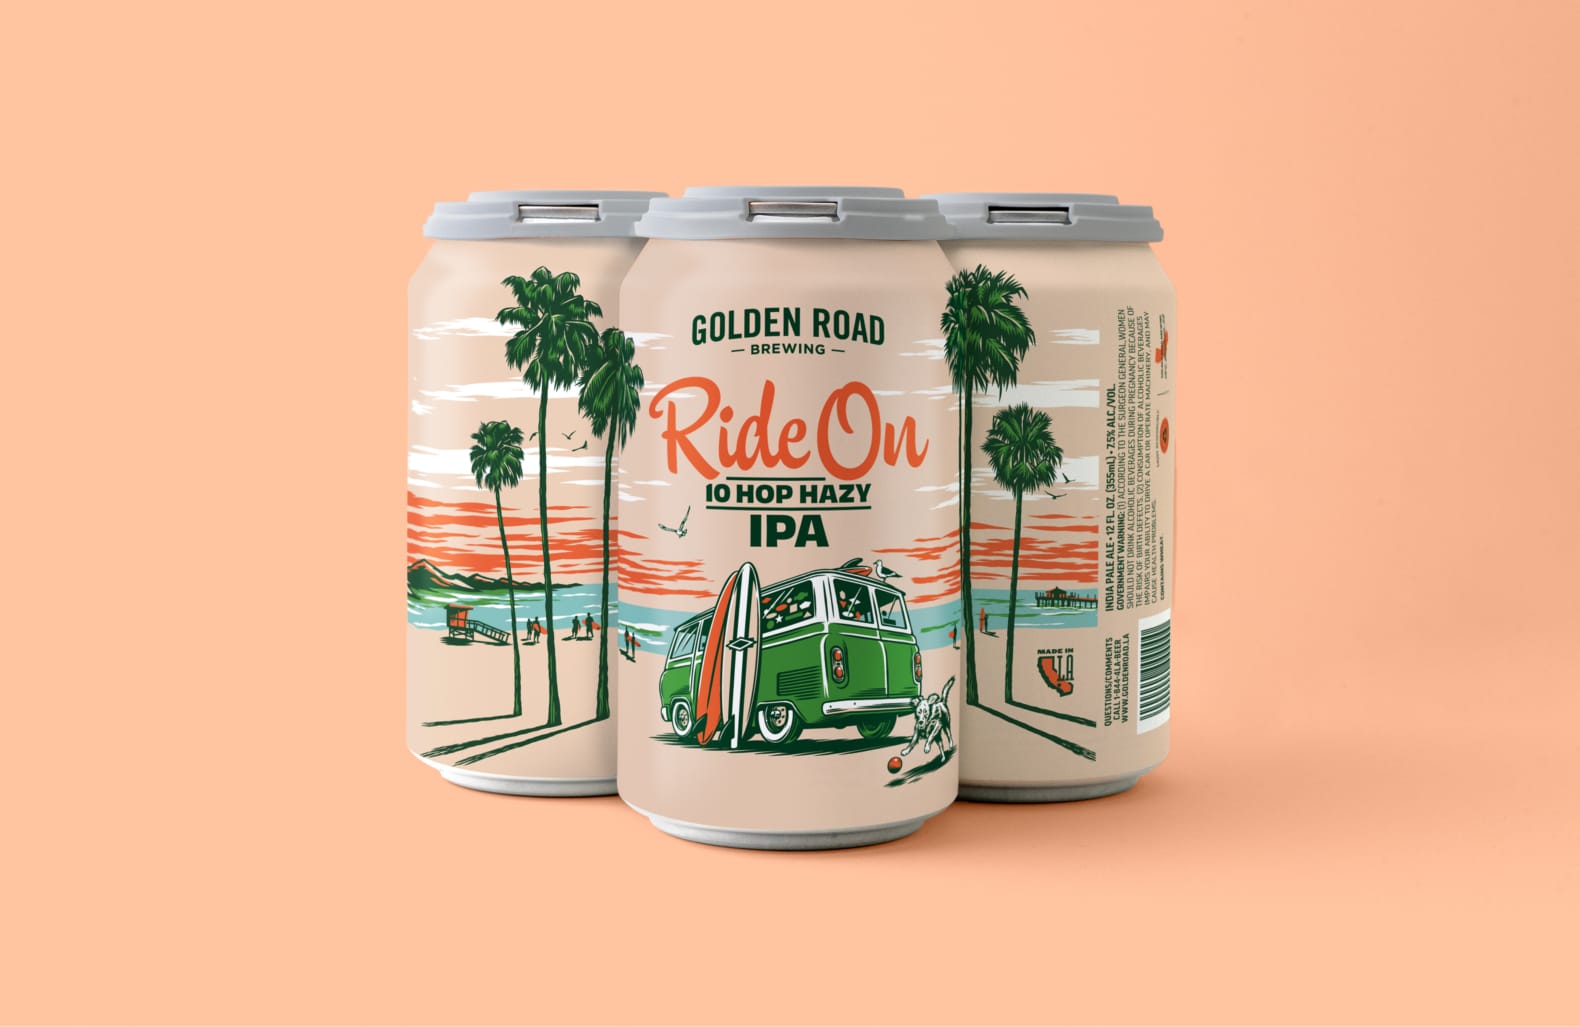 Three cans of Golden Road Ride On 10 Hop Hazy IPA against a light pink background. The can is light pink with a charming illustration showing a green vintage van, surfboards leaning against it, and a cute dog chasing a ball in the foreground. The beer’s name is Ride On 10 Hop Hazy IPA, which is seen in playful pink script and dark green block letters.